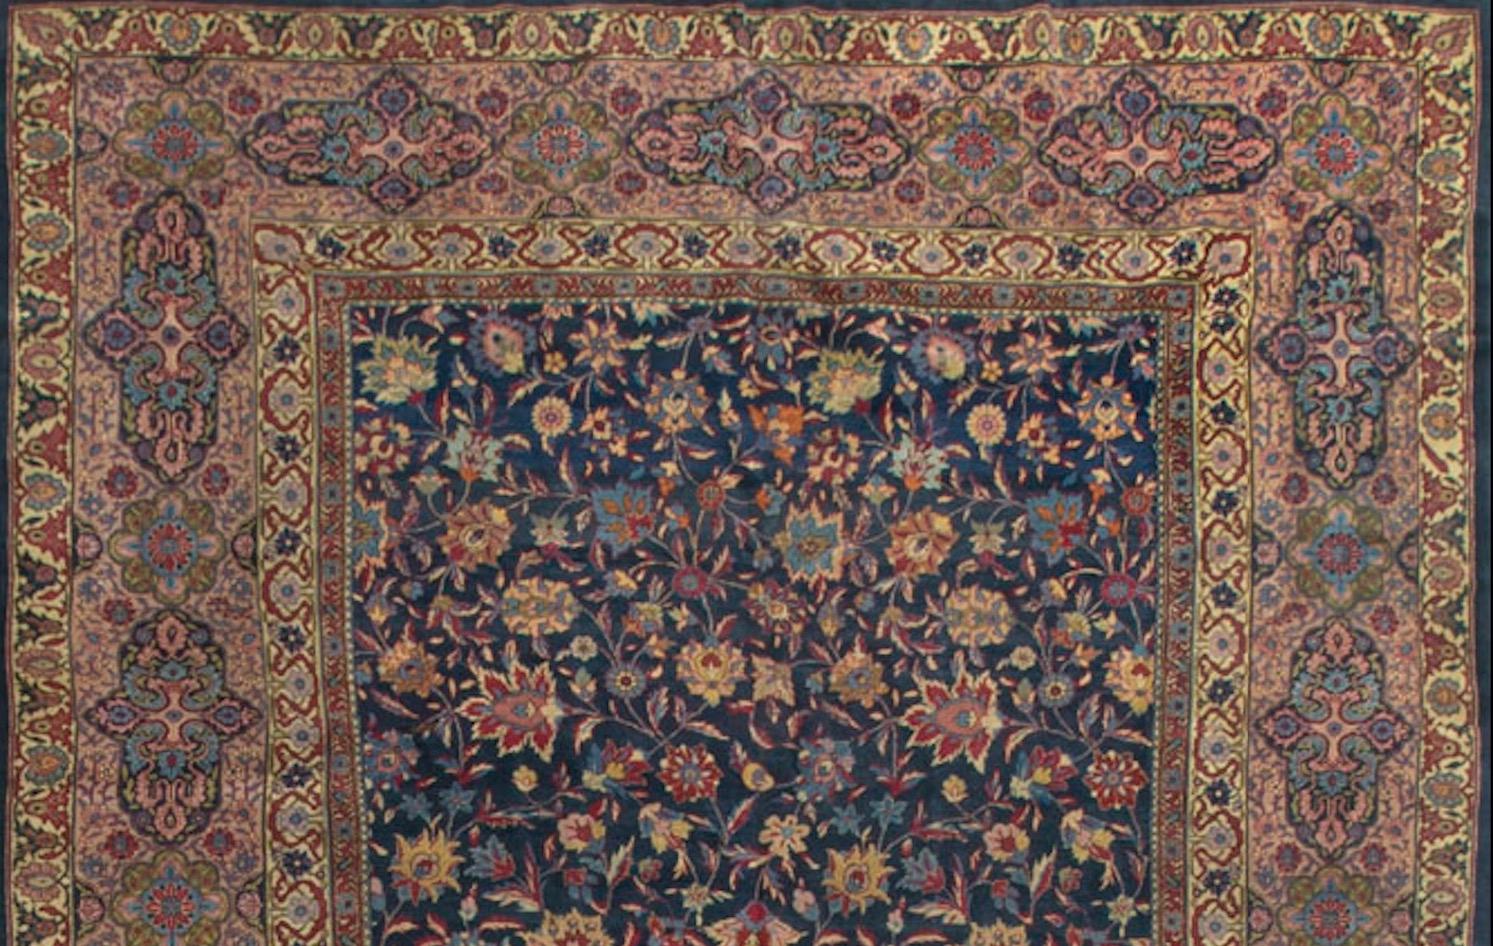 This antique Persian Kazvin rug, dating back to circa 1940, showcases a refined and detailed design typical of the region. Kazvin rugs often feature intricate floral motifs and geometric patterns. The central field of this rug likely exhibits a